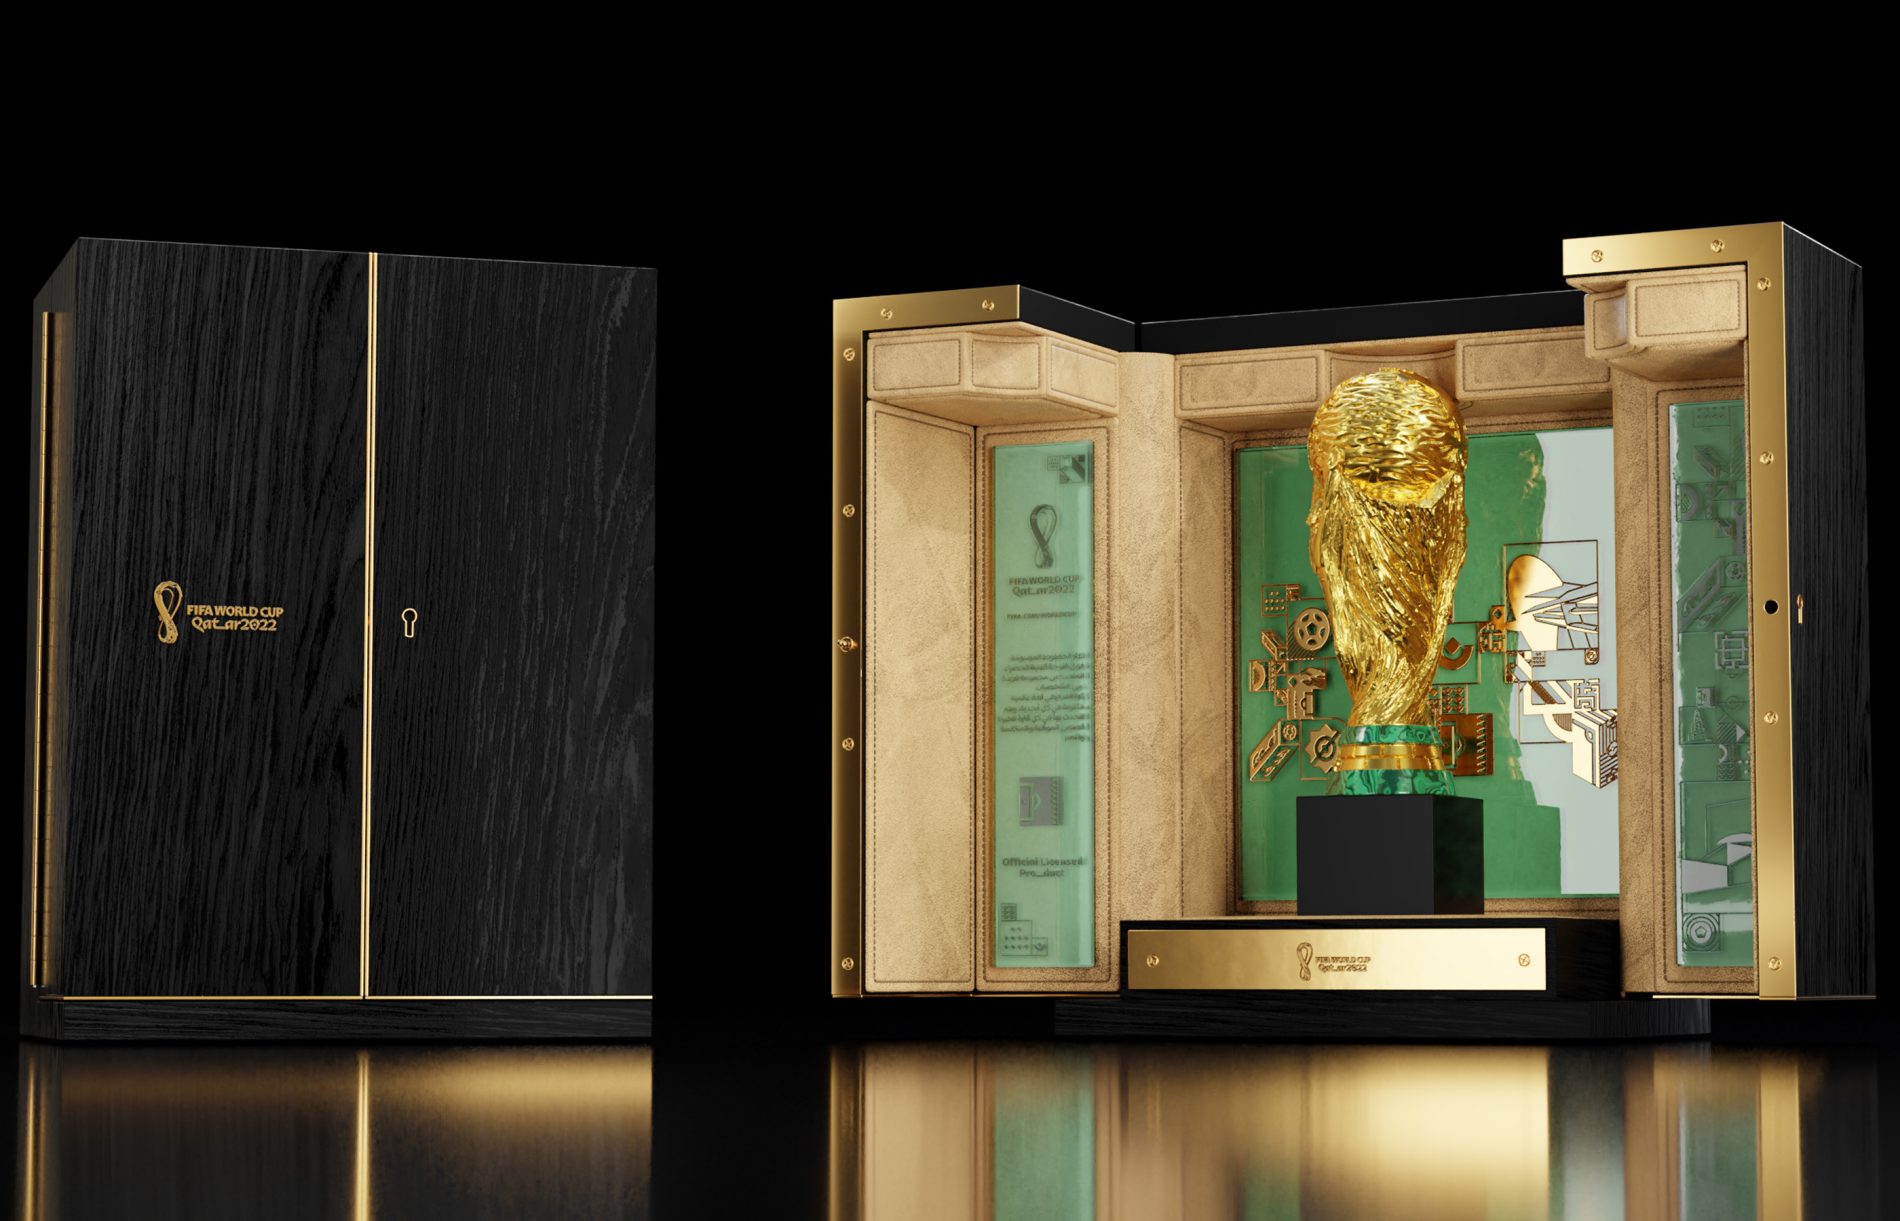 FIFA-World-Cup-trophy-case 